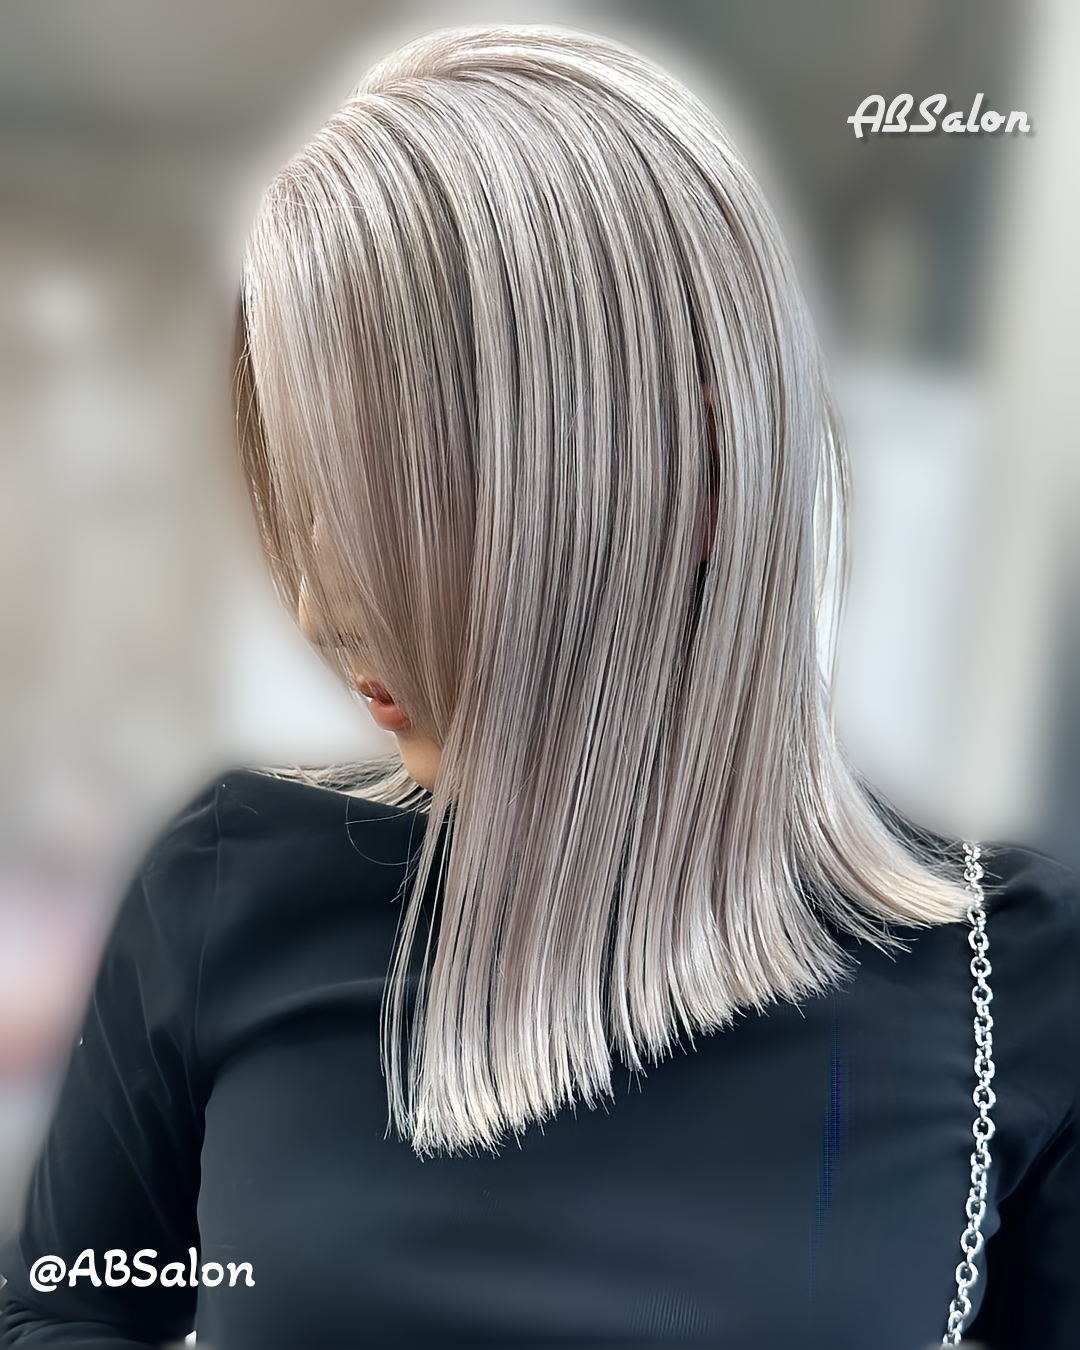 Women's cut and style